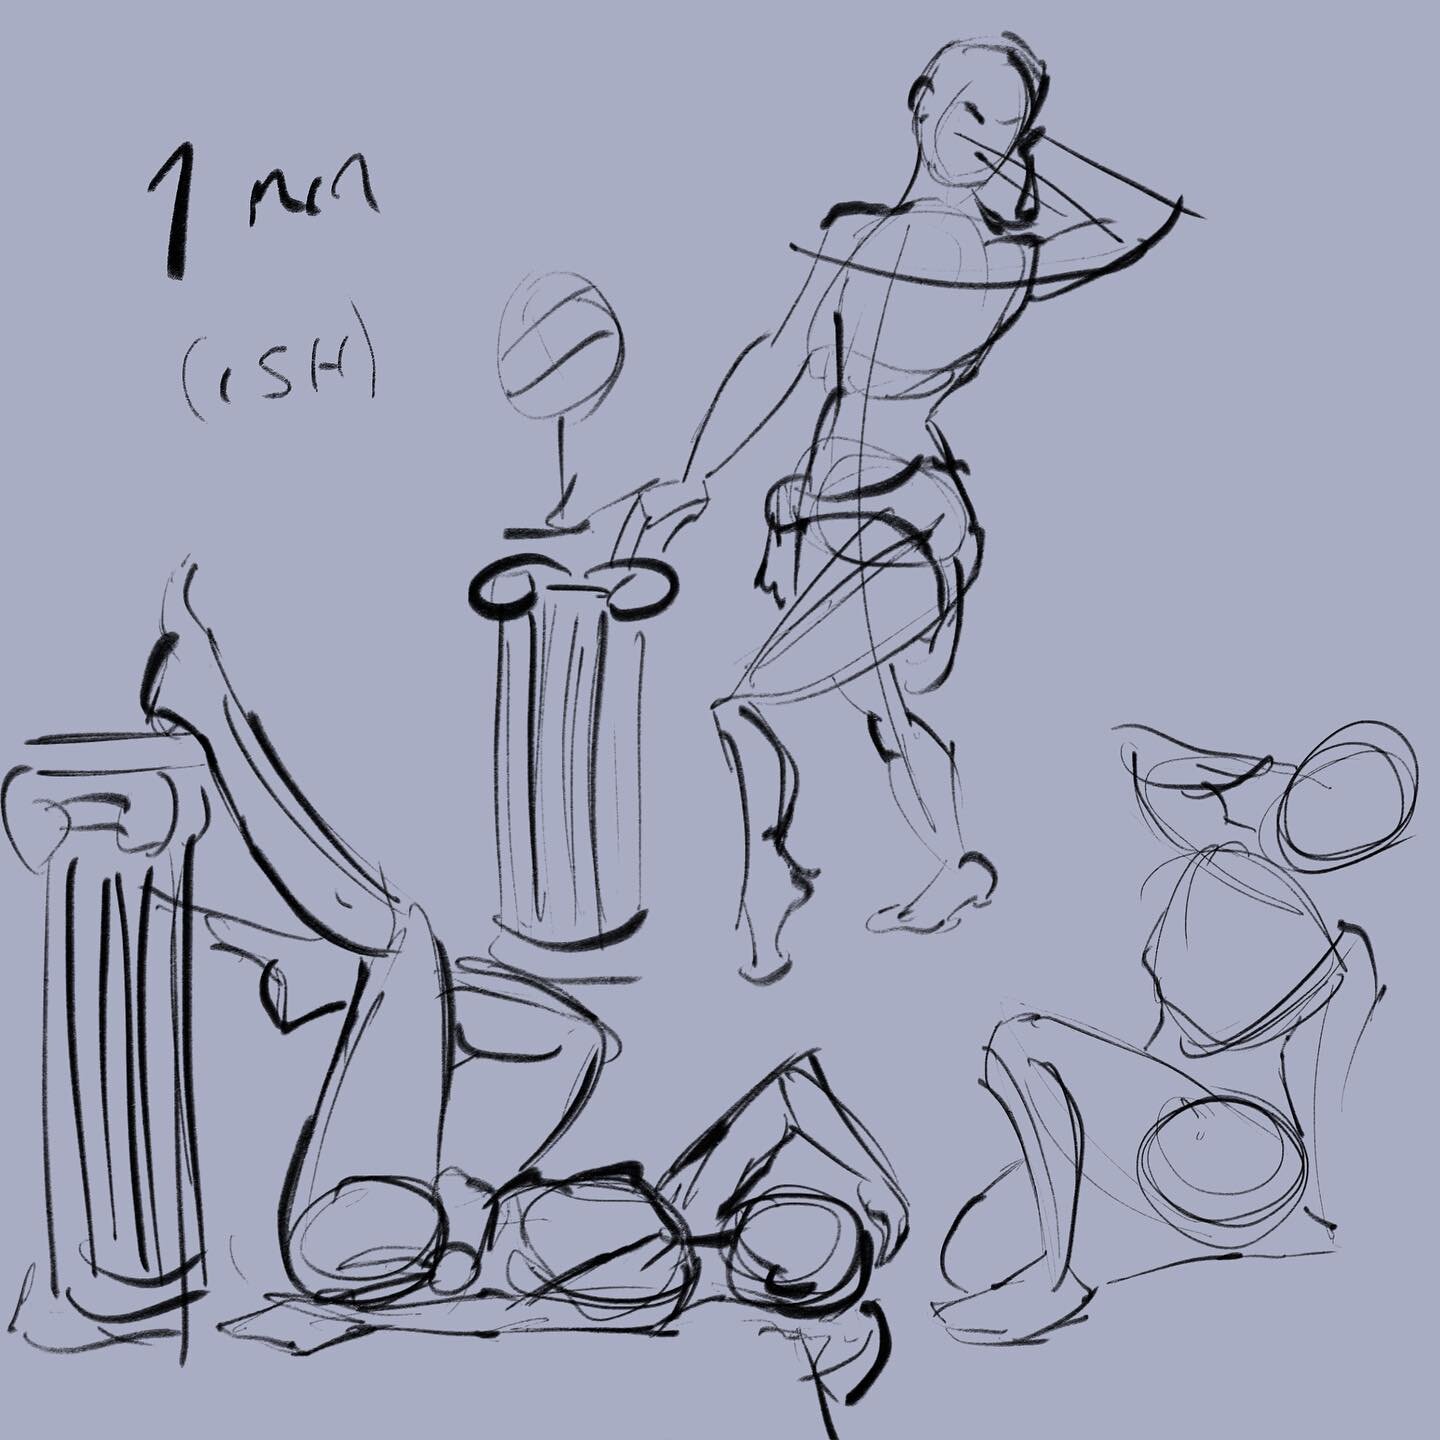 #figuary2022 &mdash; day 9 love a Greek column
.
.
#figuary2022day9 #figuredrawing #lifedrawing #sketch #drawing #greek #croquiscafe